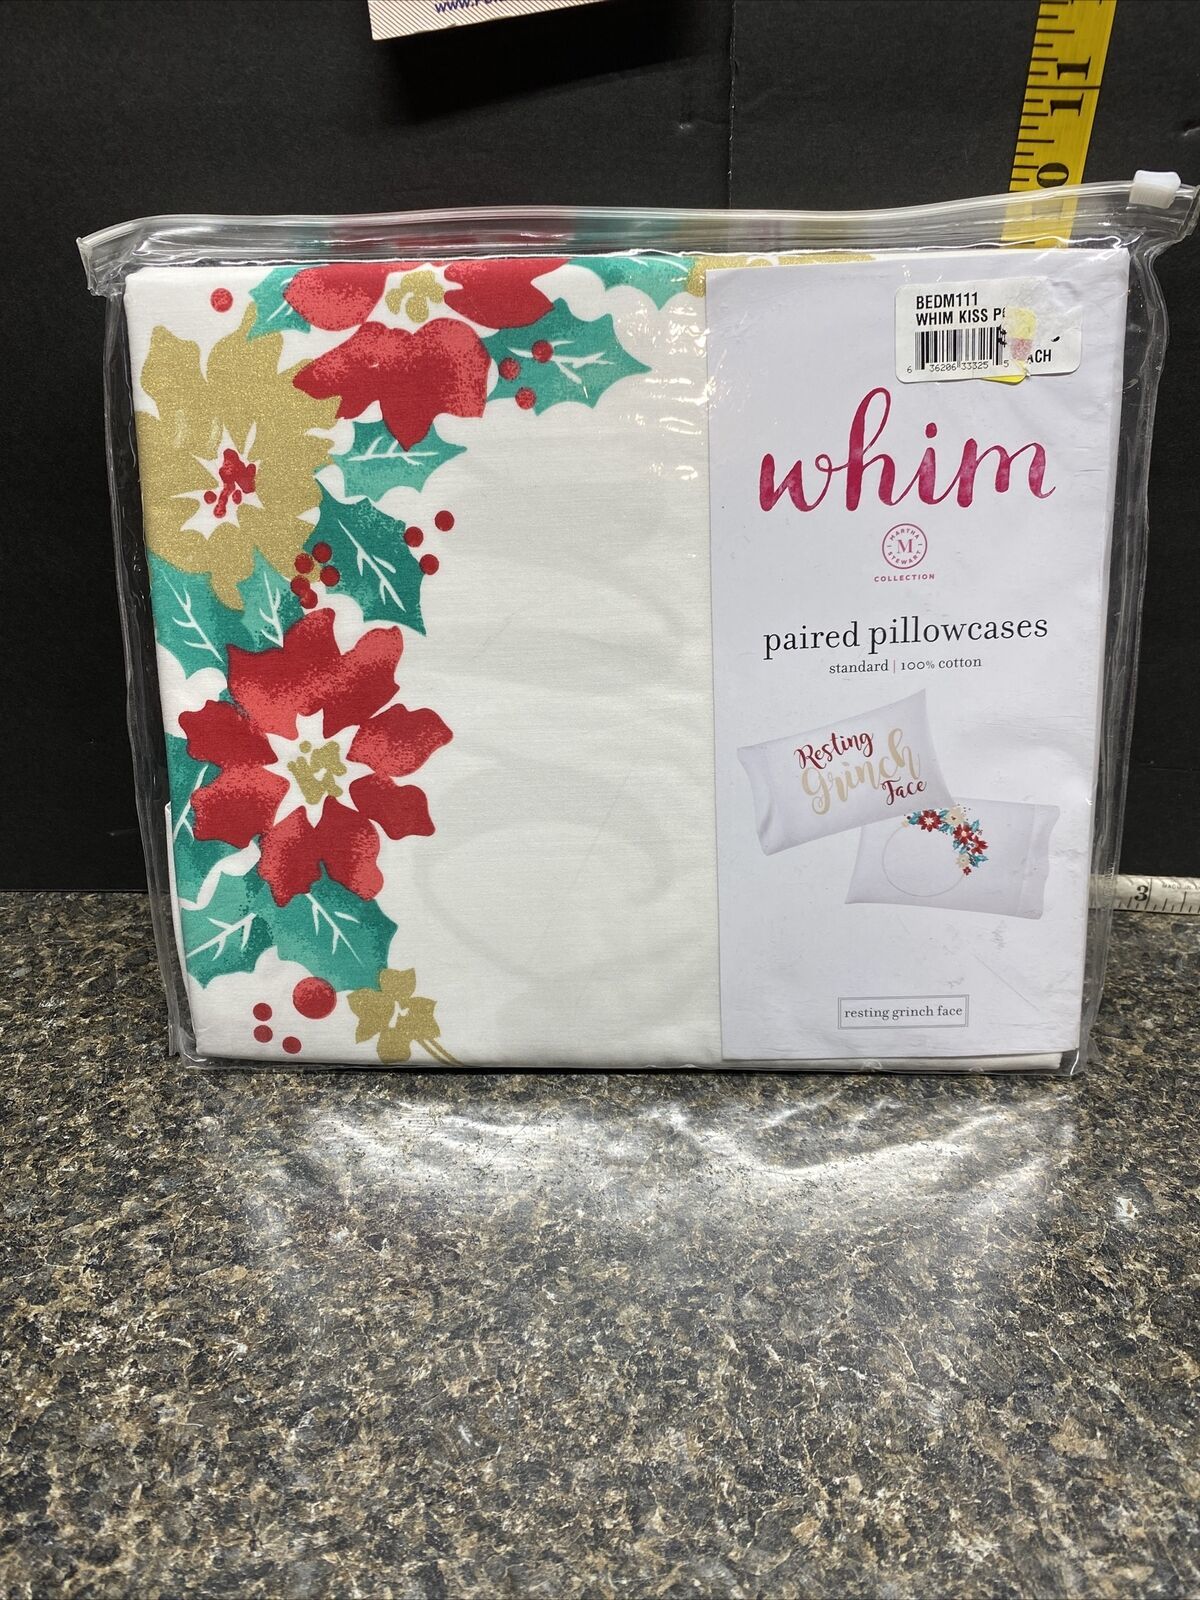 Martha Stewart Collection Whim STANDARD 100% Cotton Paired Christmas Pillowcases - $15.00